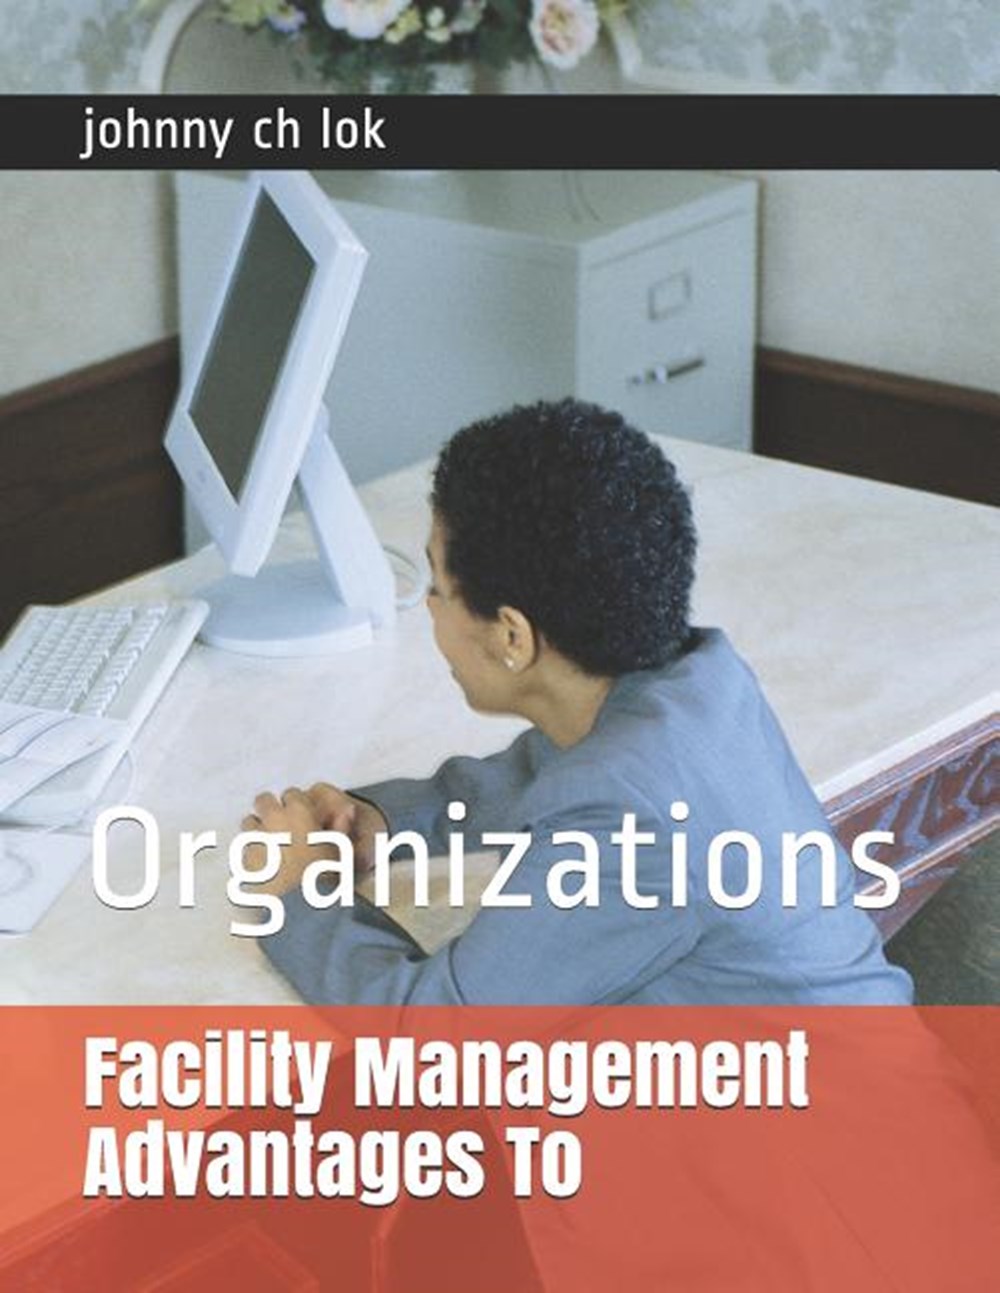 Facility Management Advantages to: Organizations